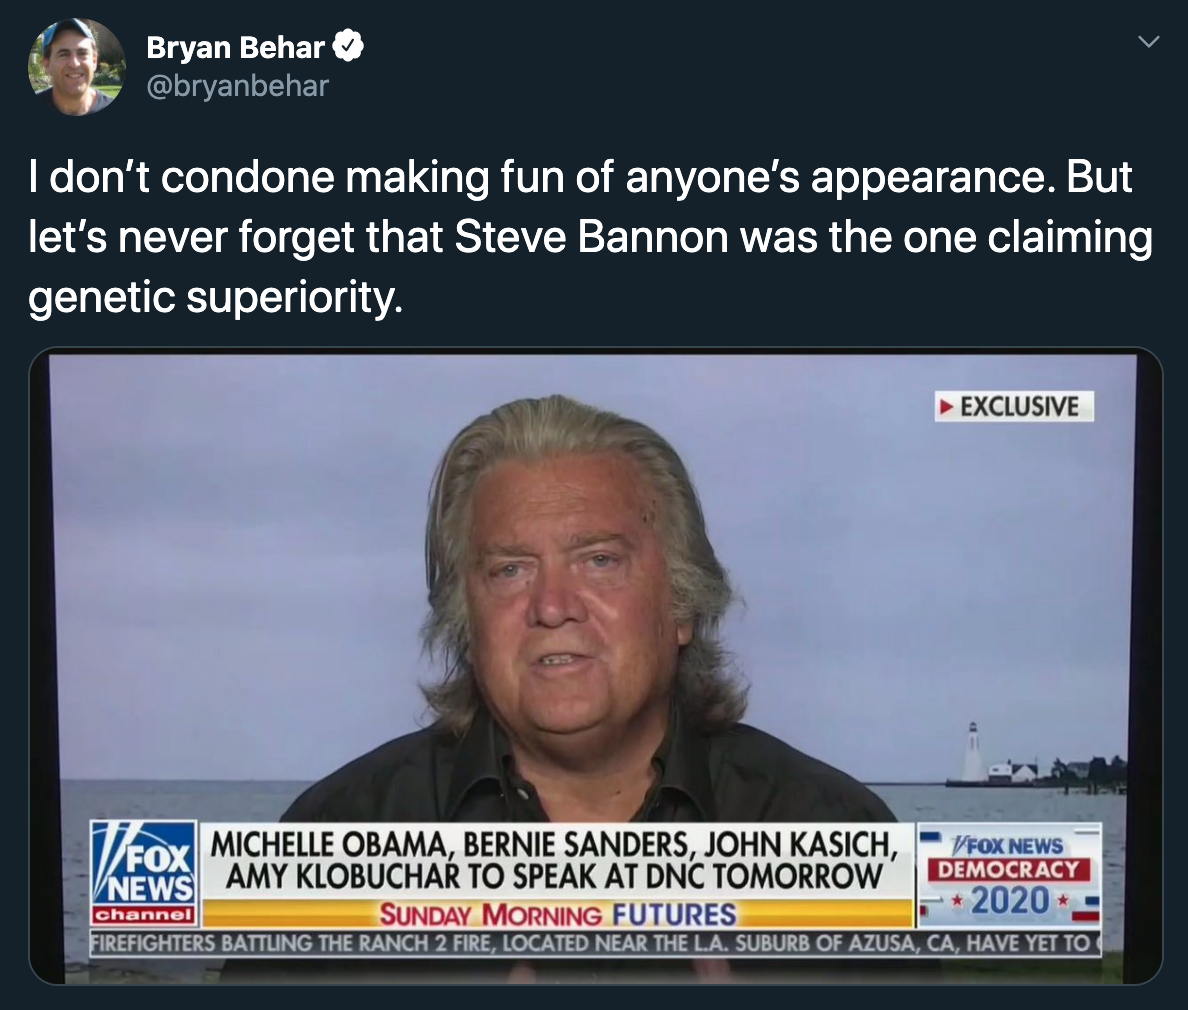 I don't condone making fun of anyone's appearance. But let's never forget that Steve Bannon was the one claiming genetic superiority.